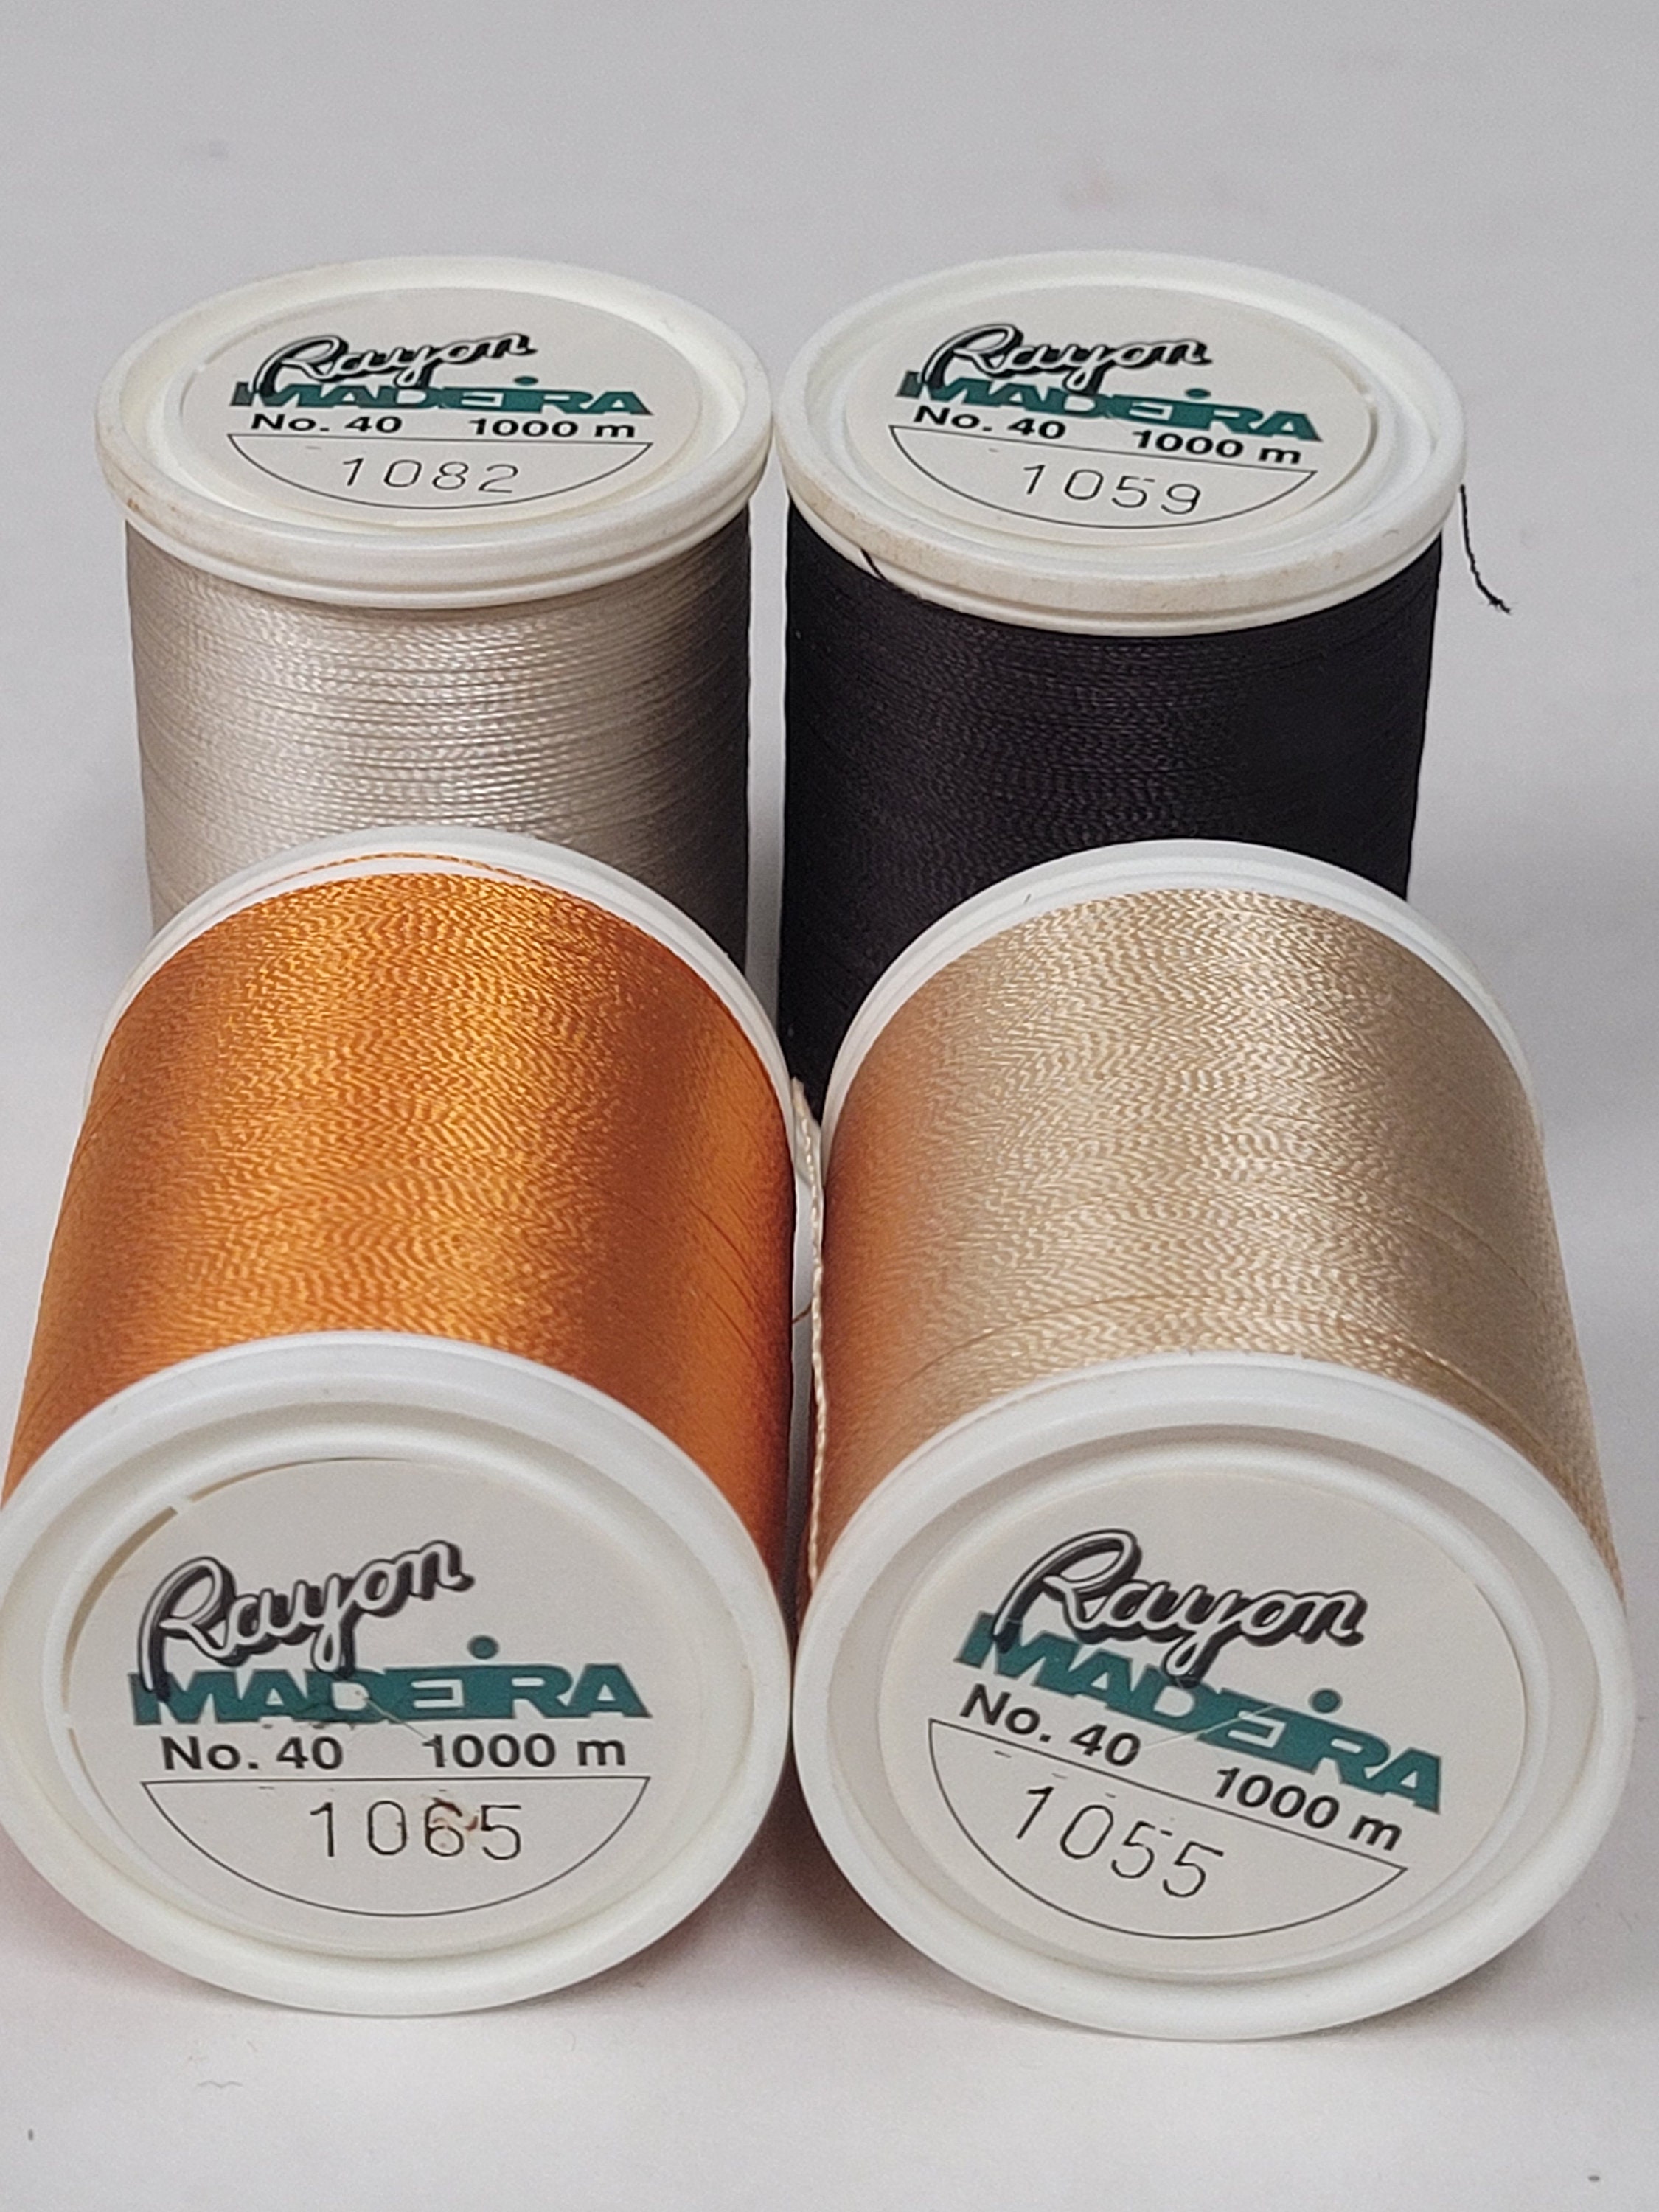 Madeira #40 Weight Classic Rayon Thread Kit - 12 Pack, 5500yd